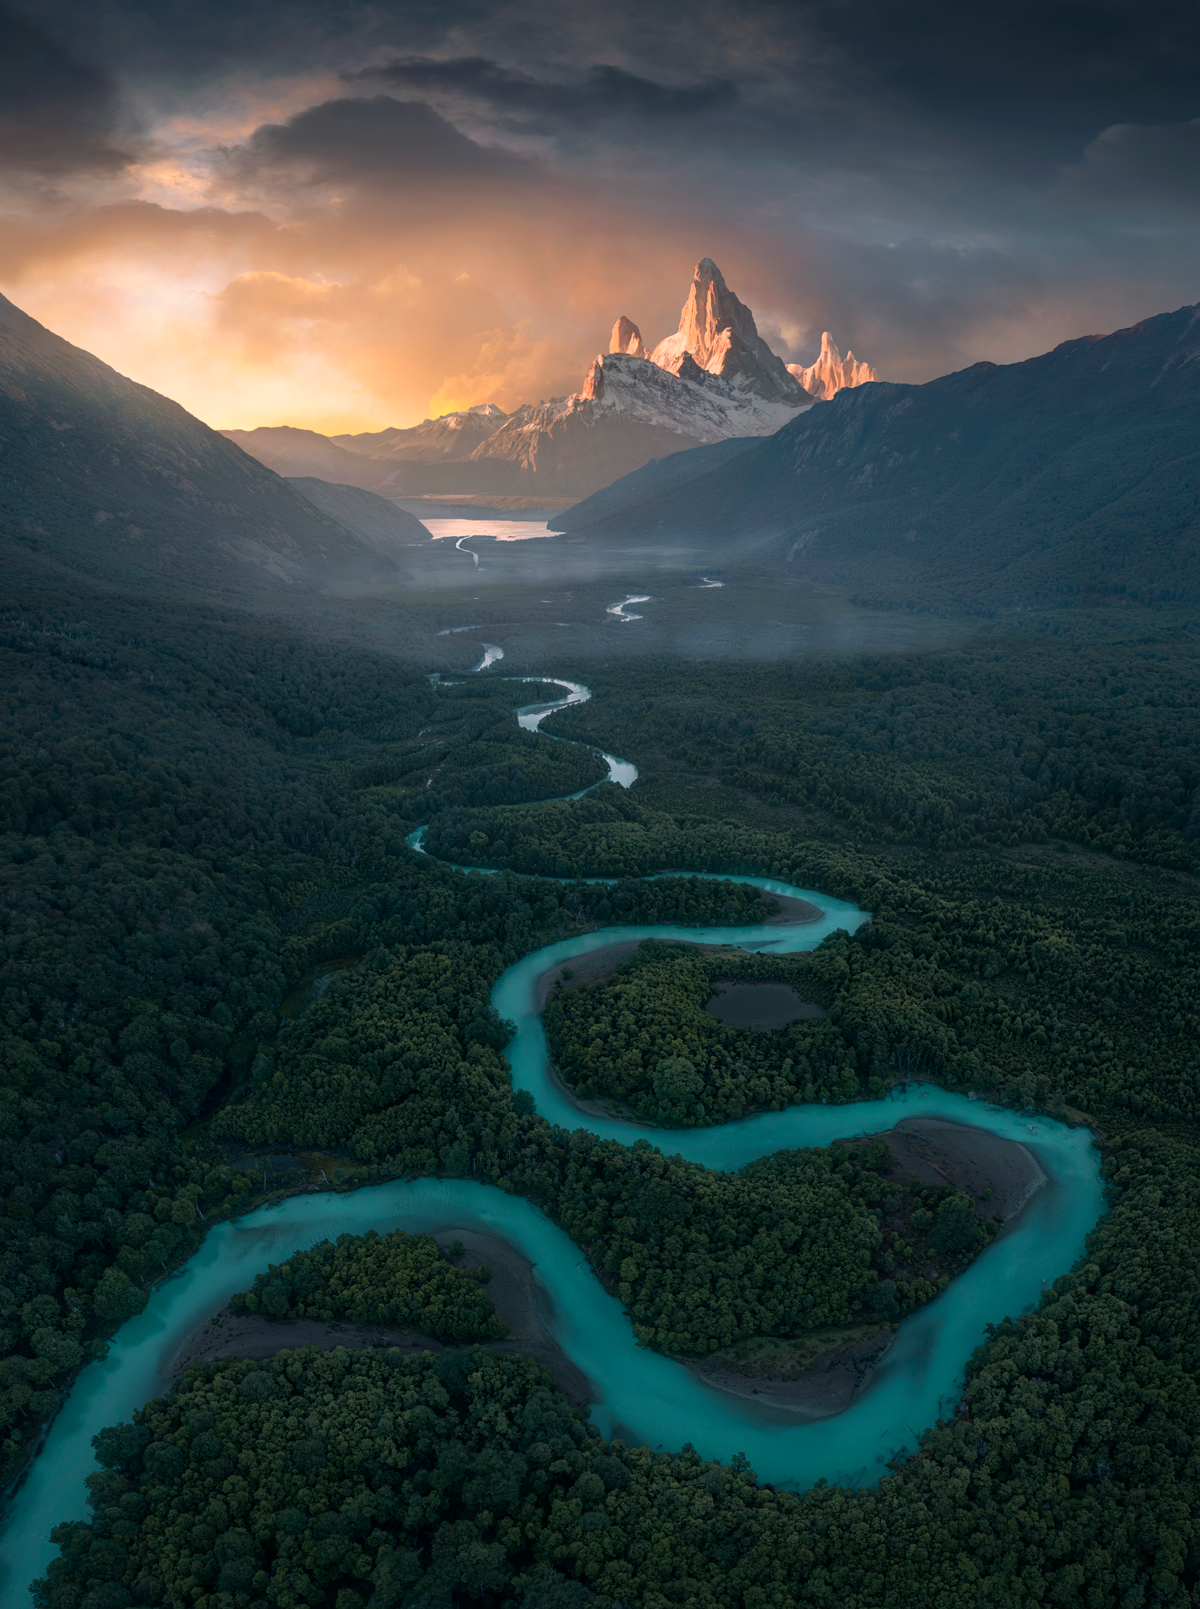 3rd Place: © Max Rive, The Winding Journey, 'The 9th International Landscape Photographer of the Year', internationallandscapephotographer.com